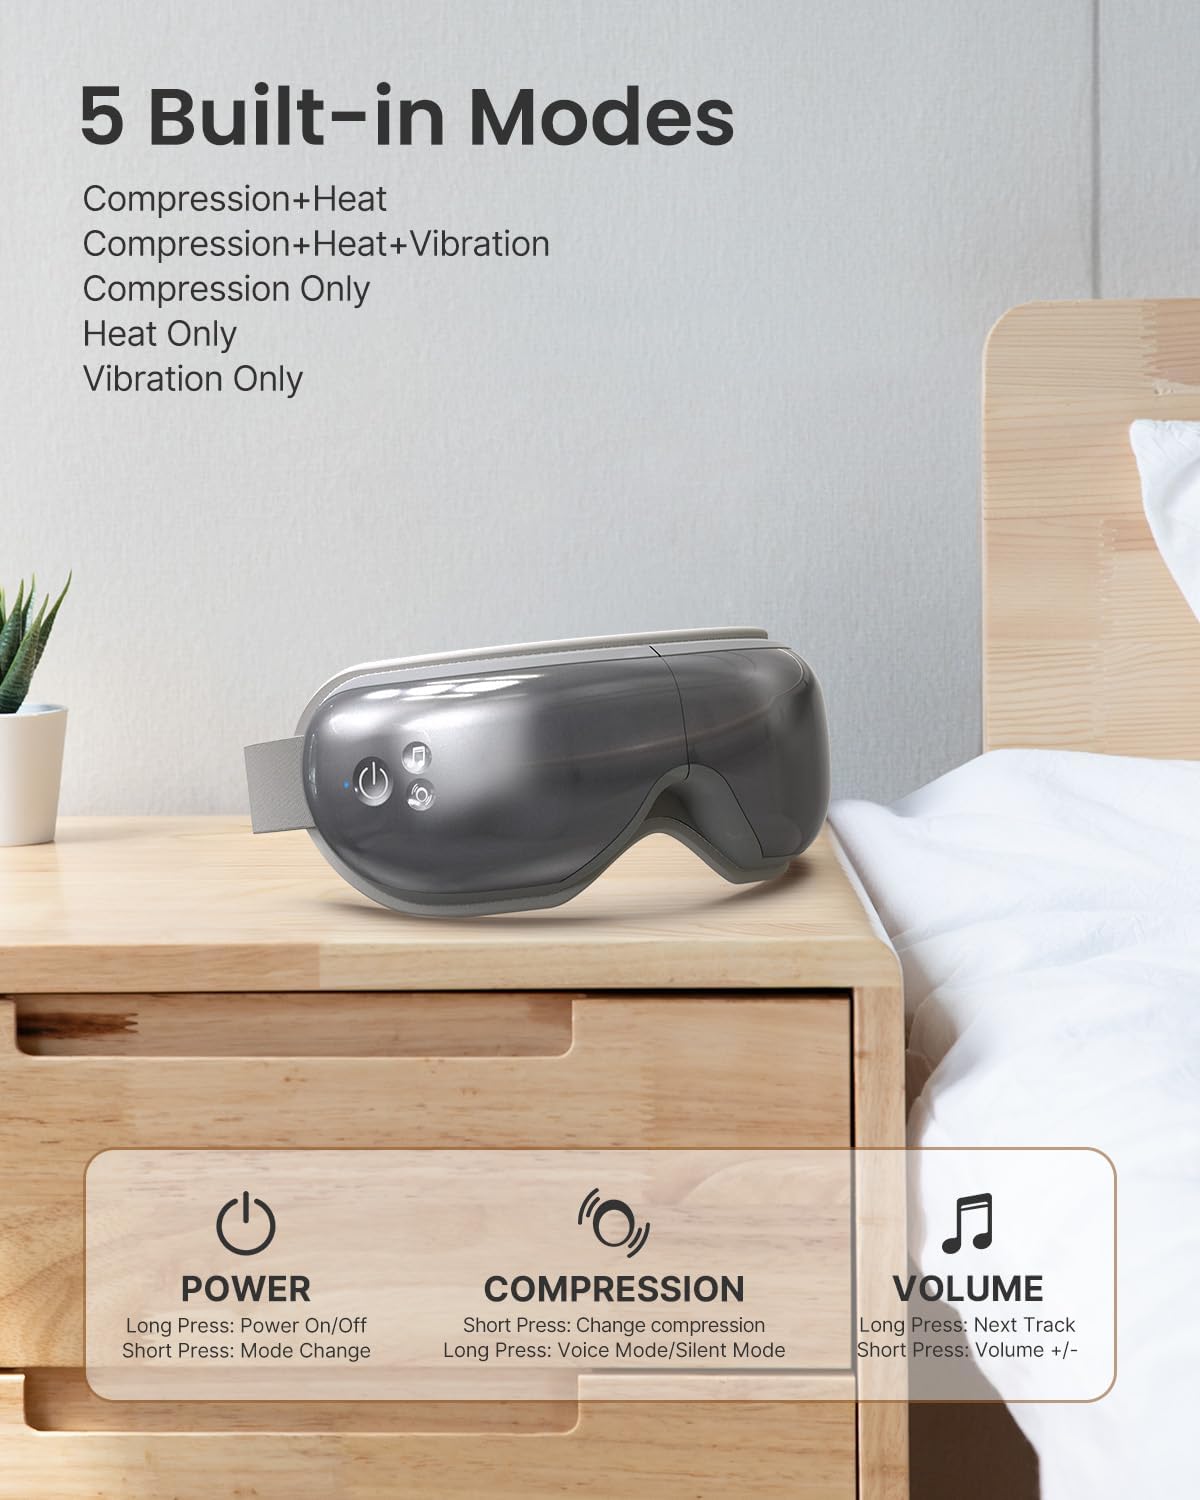 RENPHO Eyeris 1 Eye Massager with Heat, Customizable Bluetooth Music - Holistic Eye Care for Beauty Salon, Spa Relaxation, Travel\/Study\/Work\/Car\/Airplane Relaxation, Mom\/Dad\/Wife Gifts, Staff Gifts